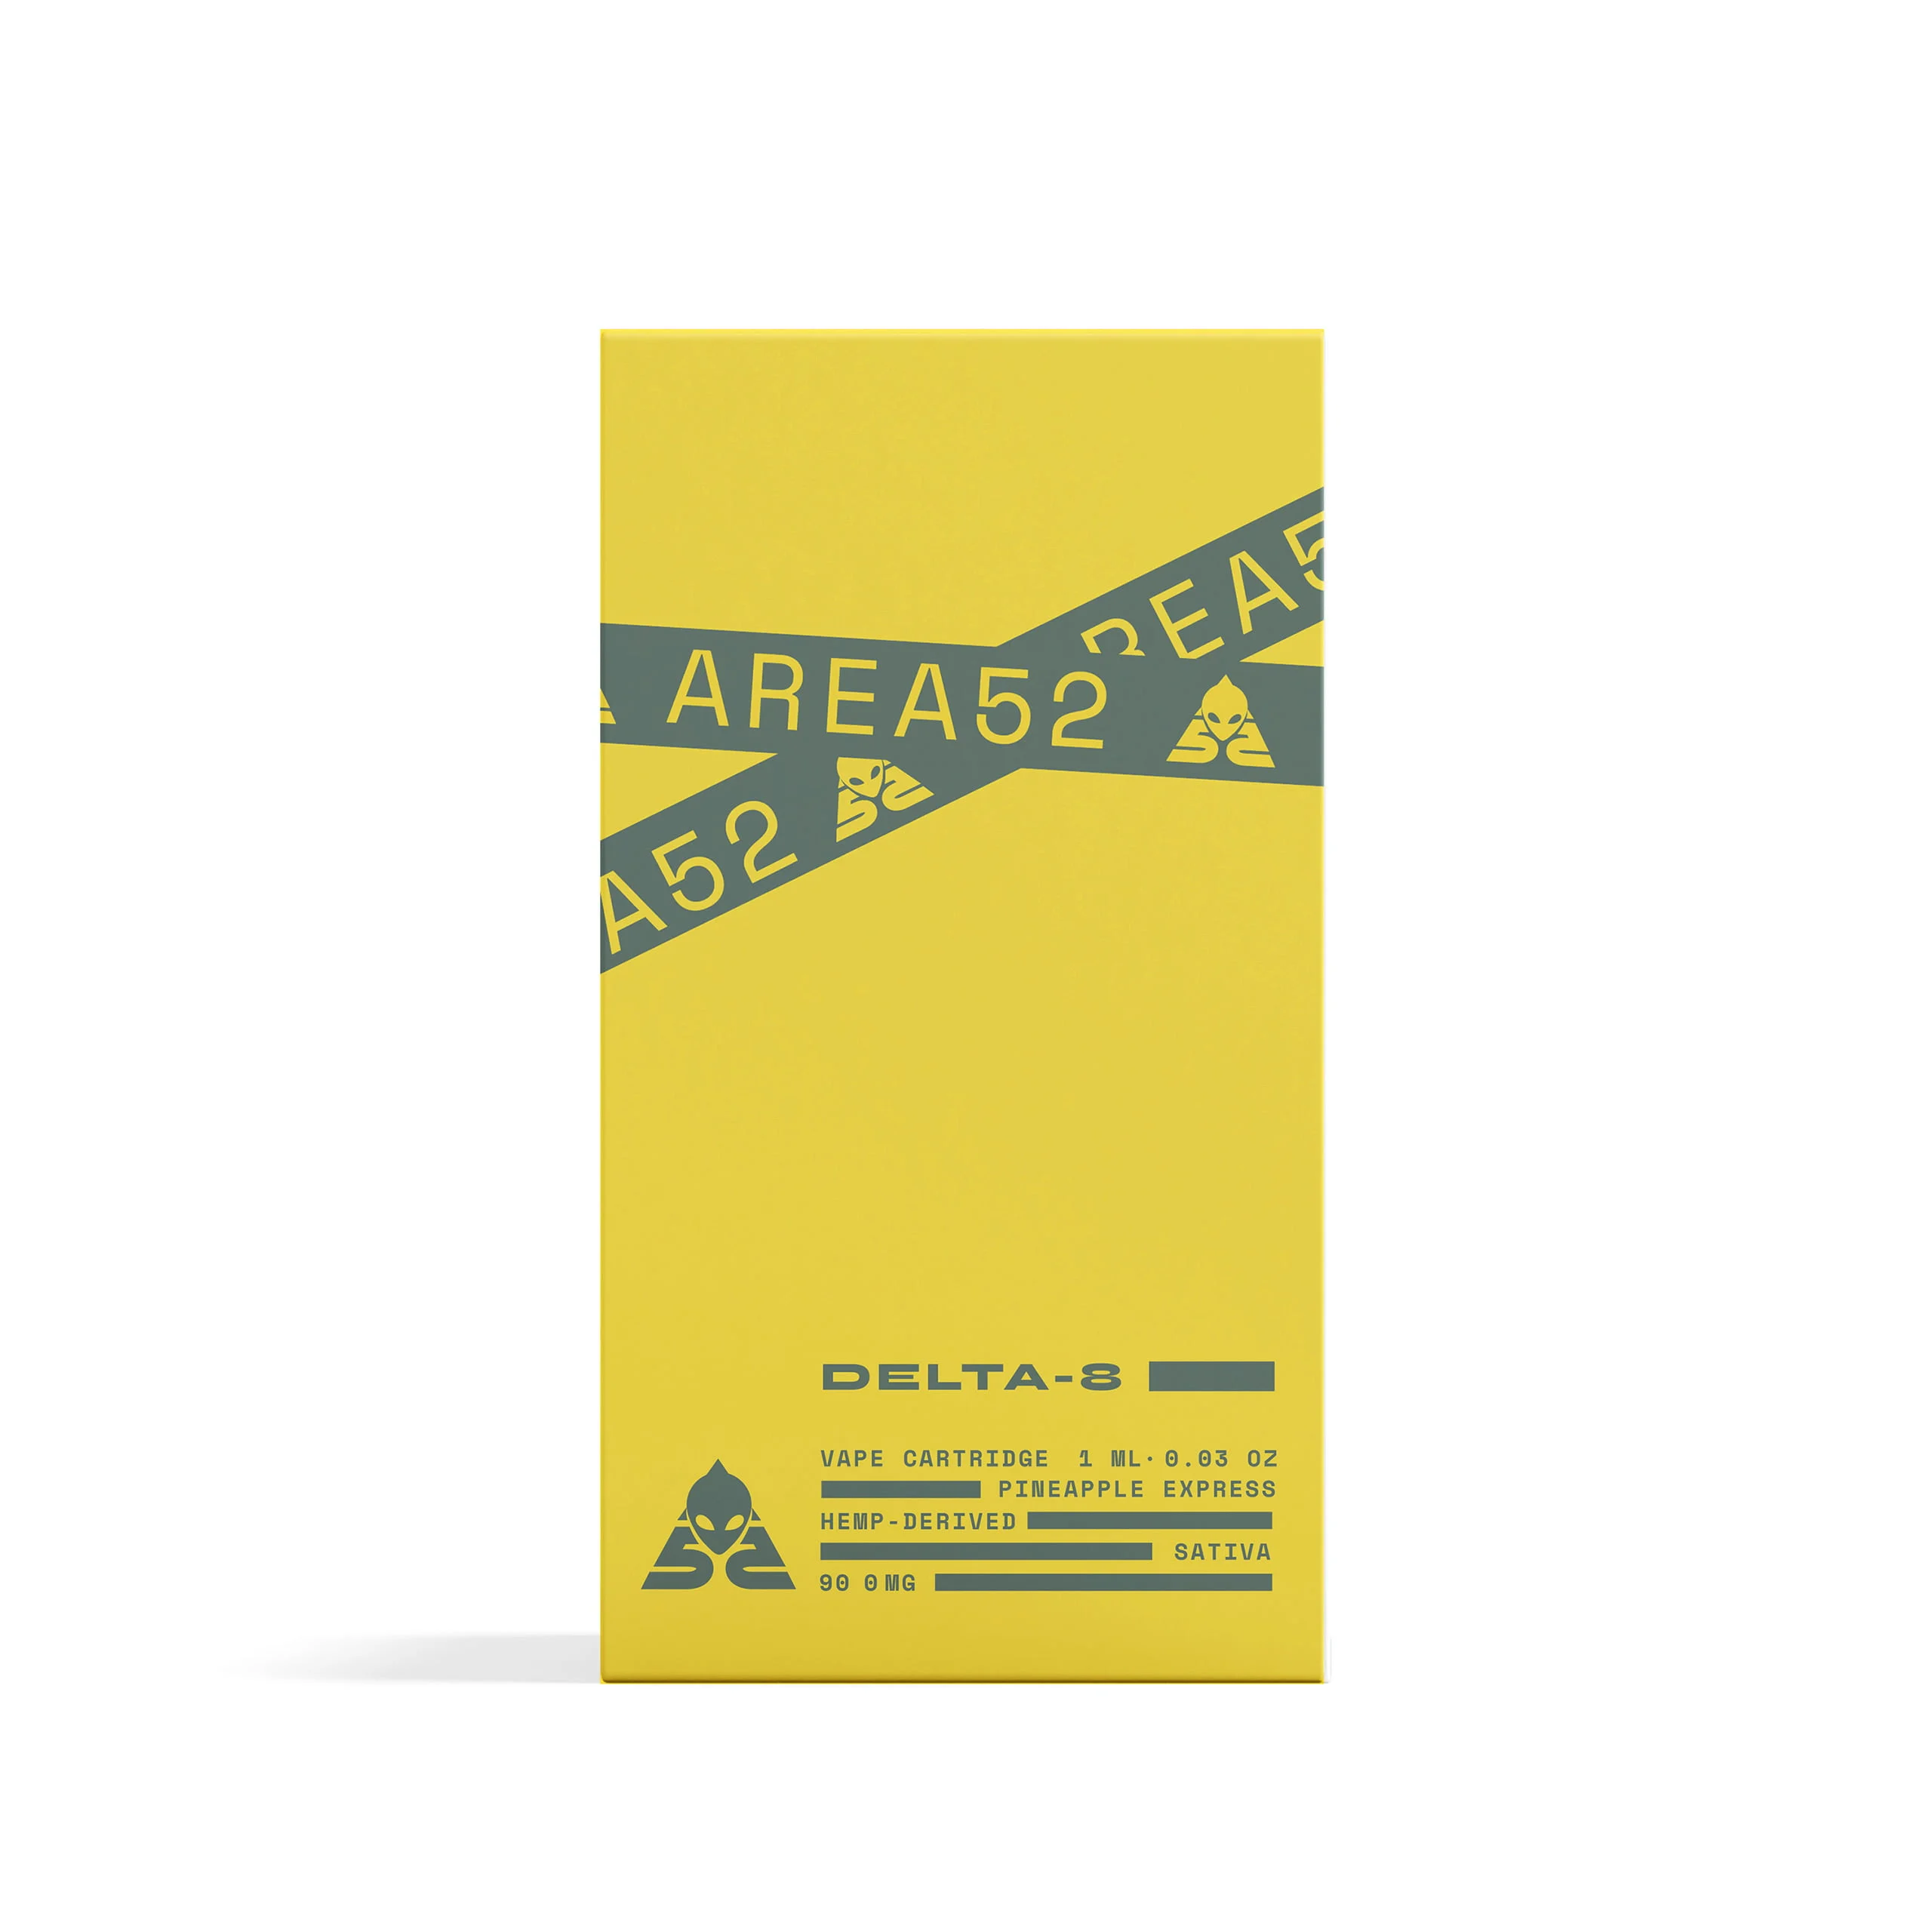 Discover the Best Delta 8 Carts from Area 52